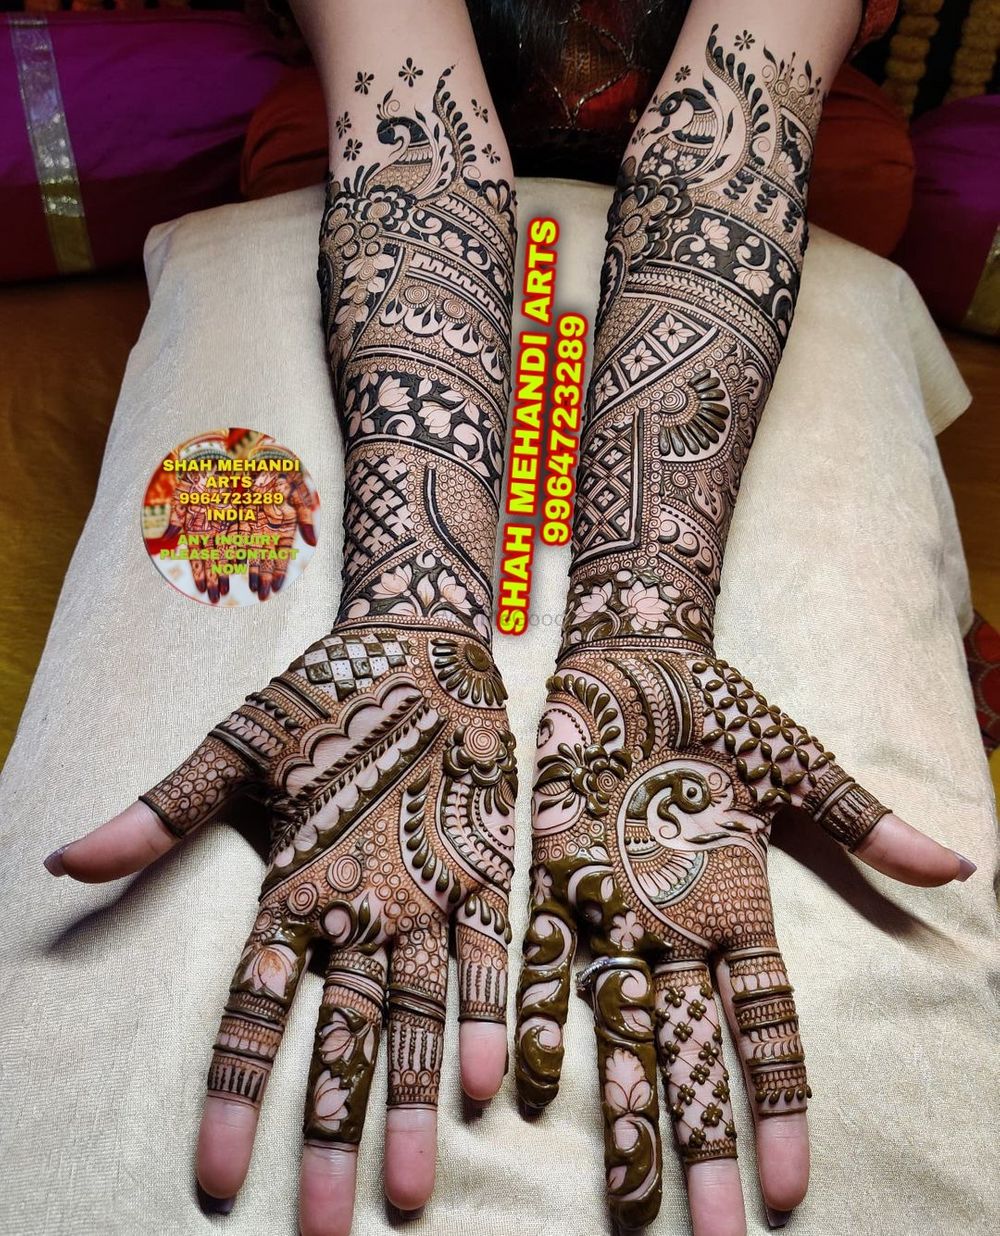 Photo From BRIDAL SPECIALIST BANGALORE 2022 - By Shah Mehandi Arts